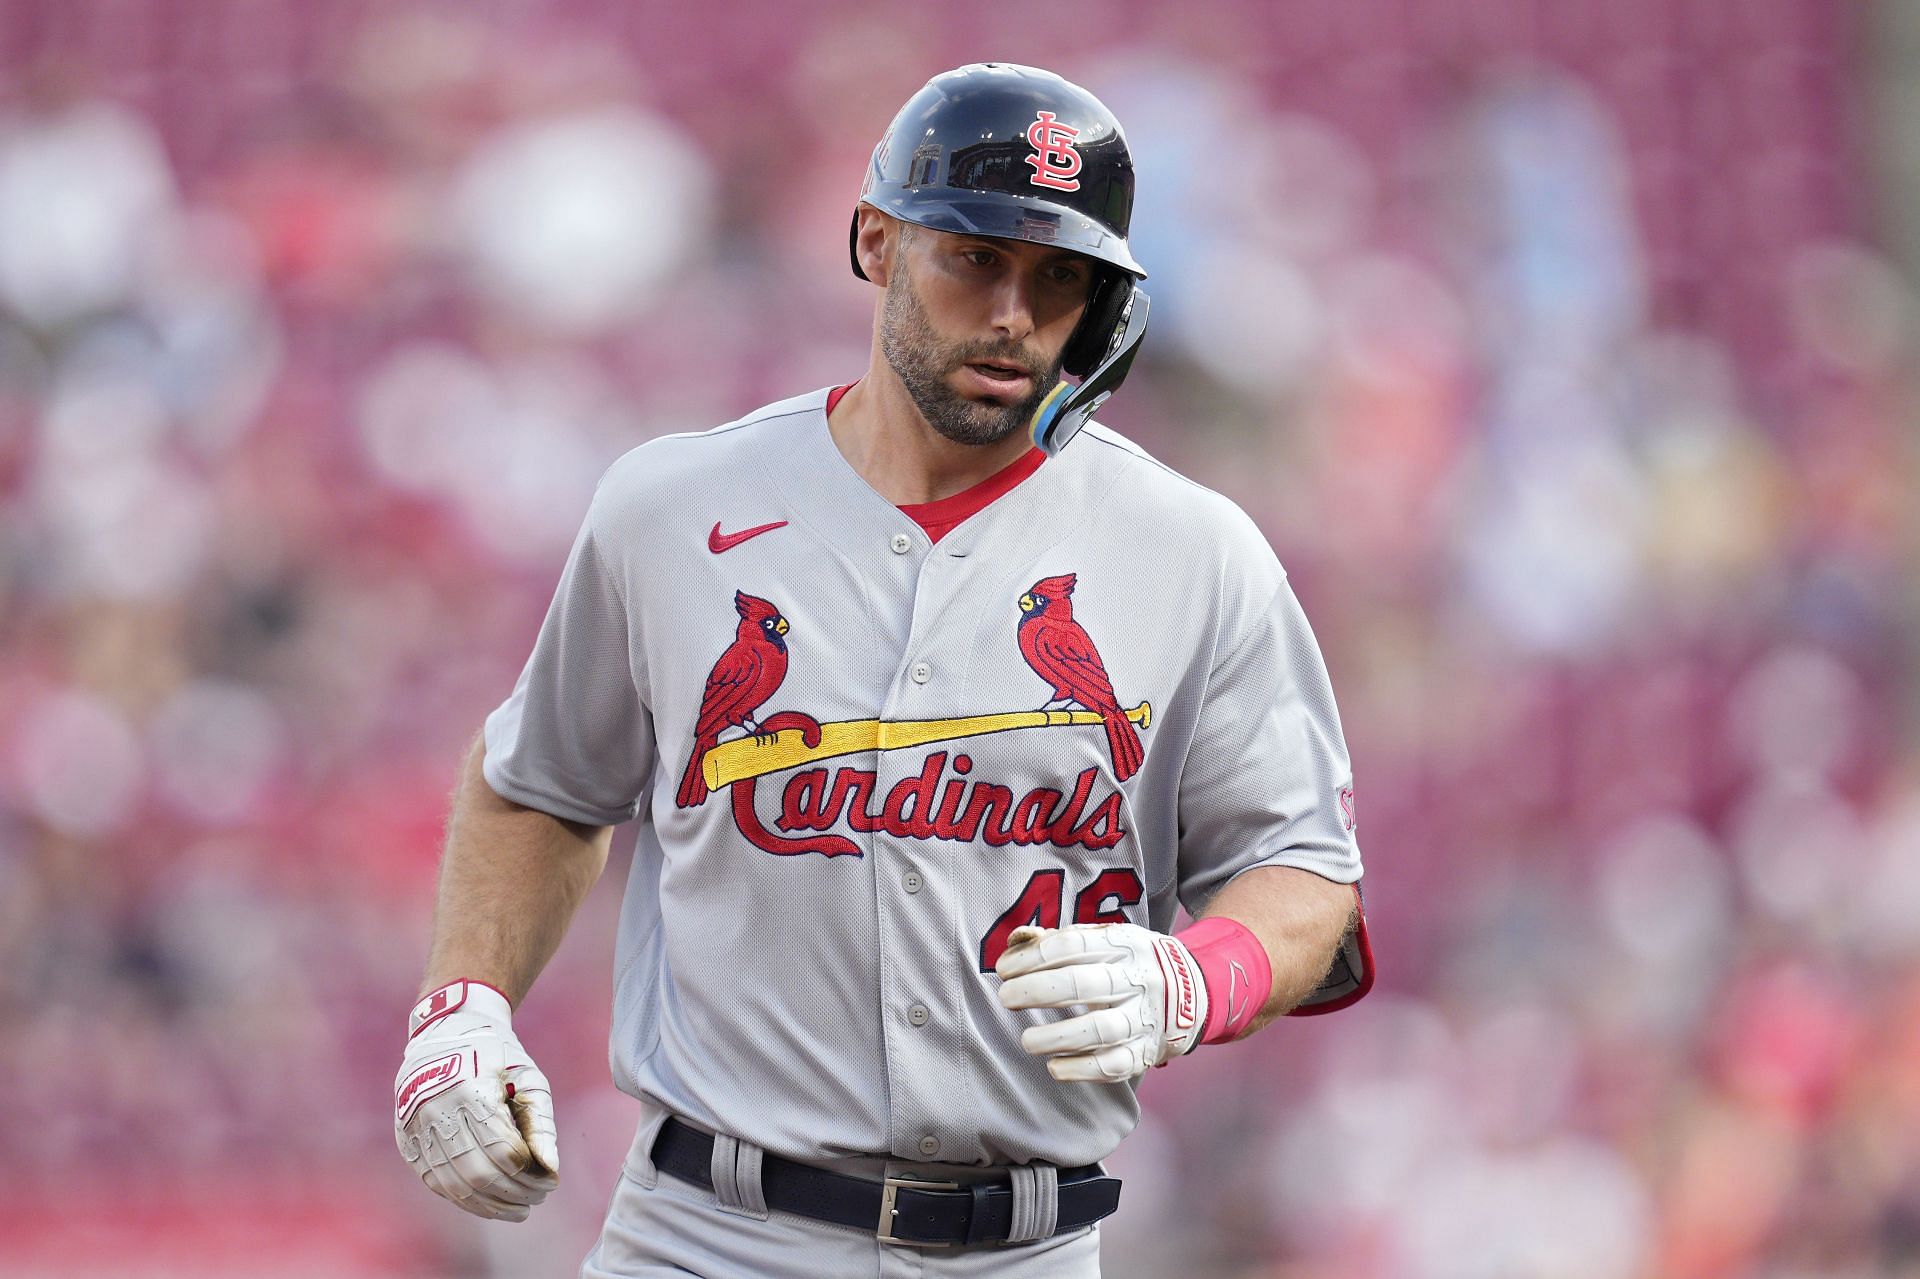 Goldschmidt drives in three to reach 1,002 RBIs, Cards beat Reds 6